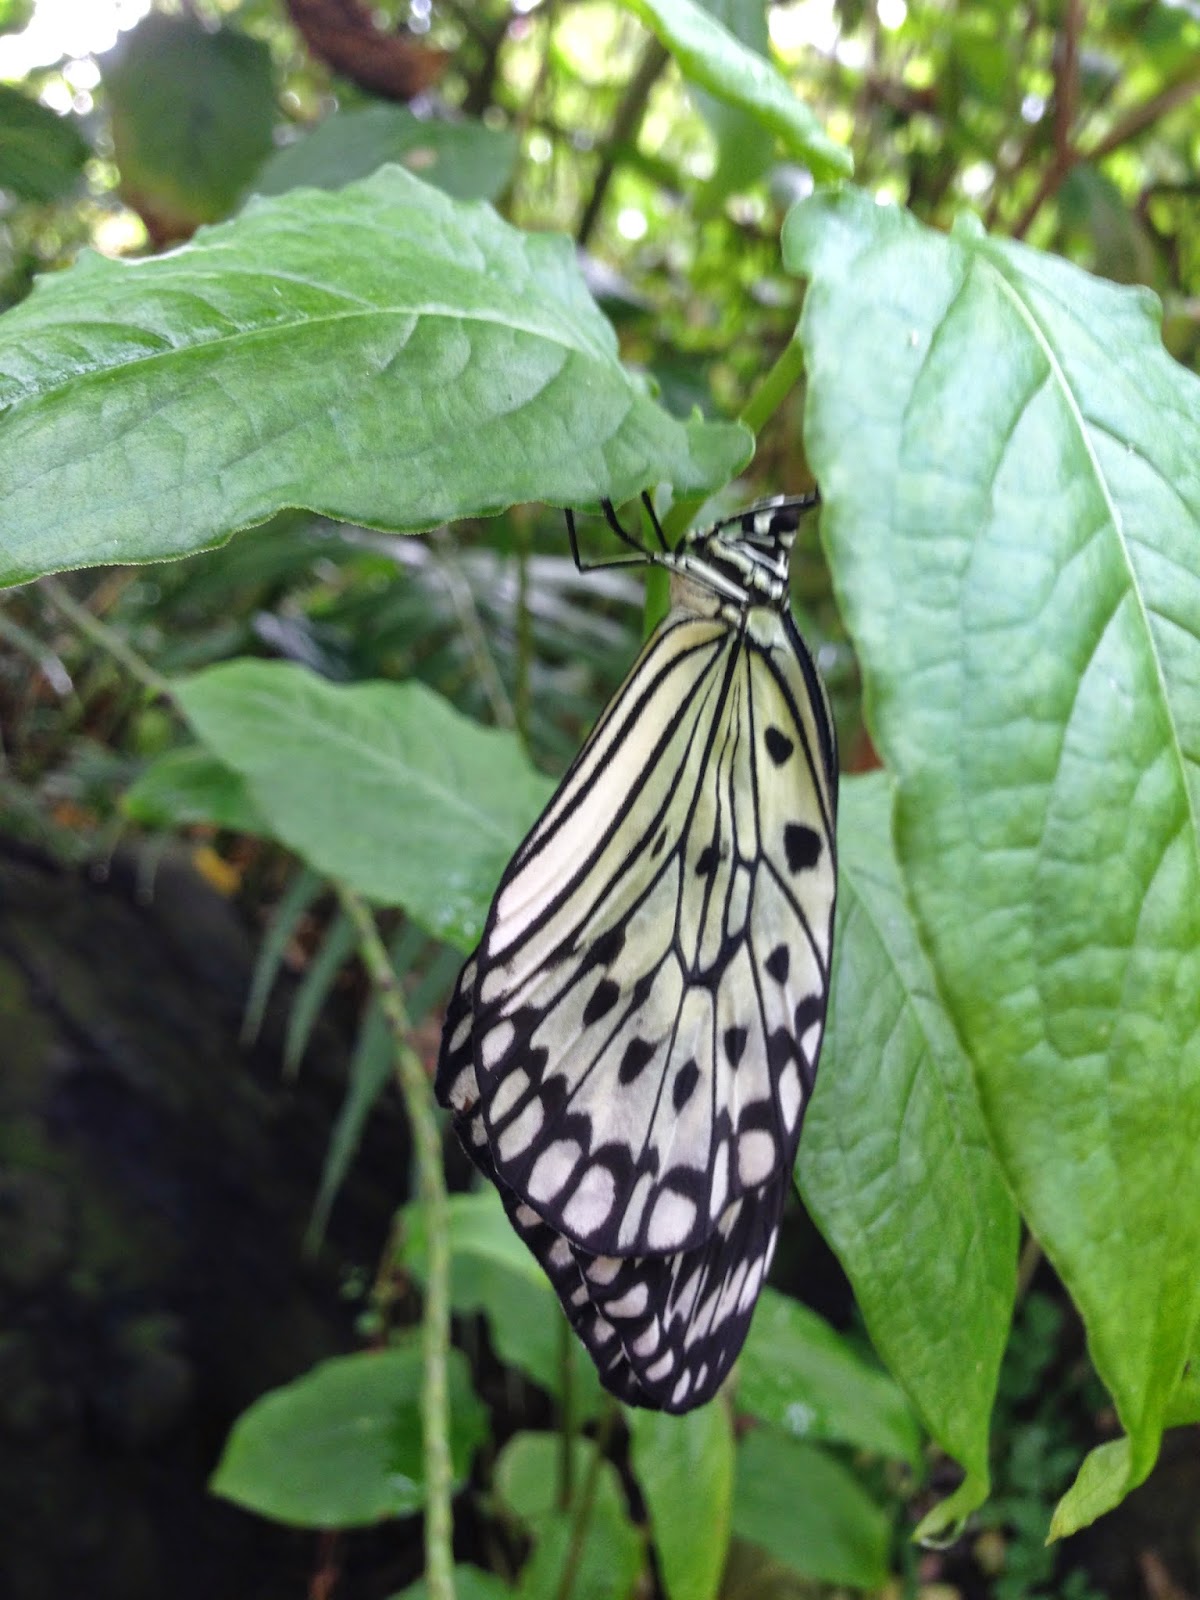 A day in Grade 3D: An Outing to Butterfly World